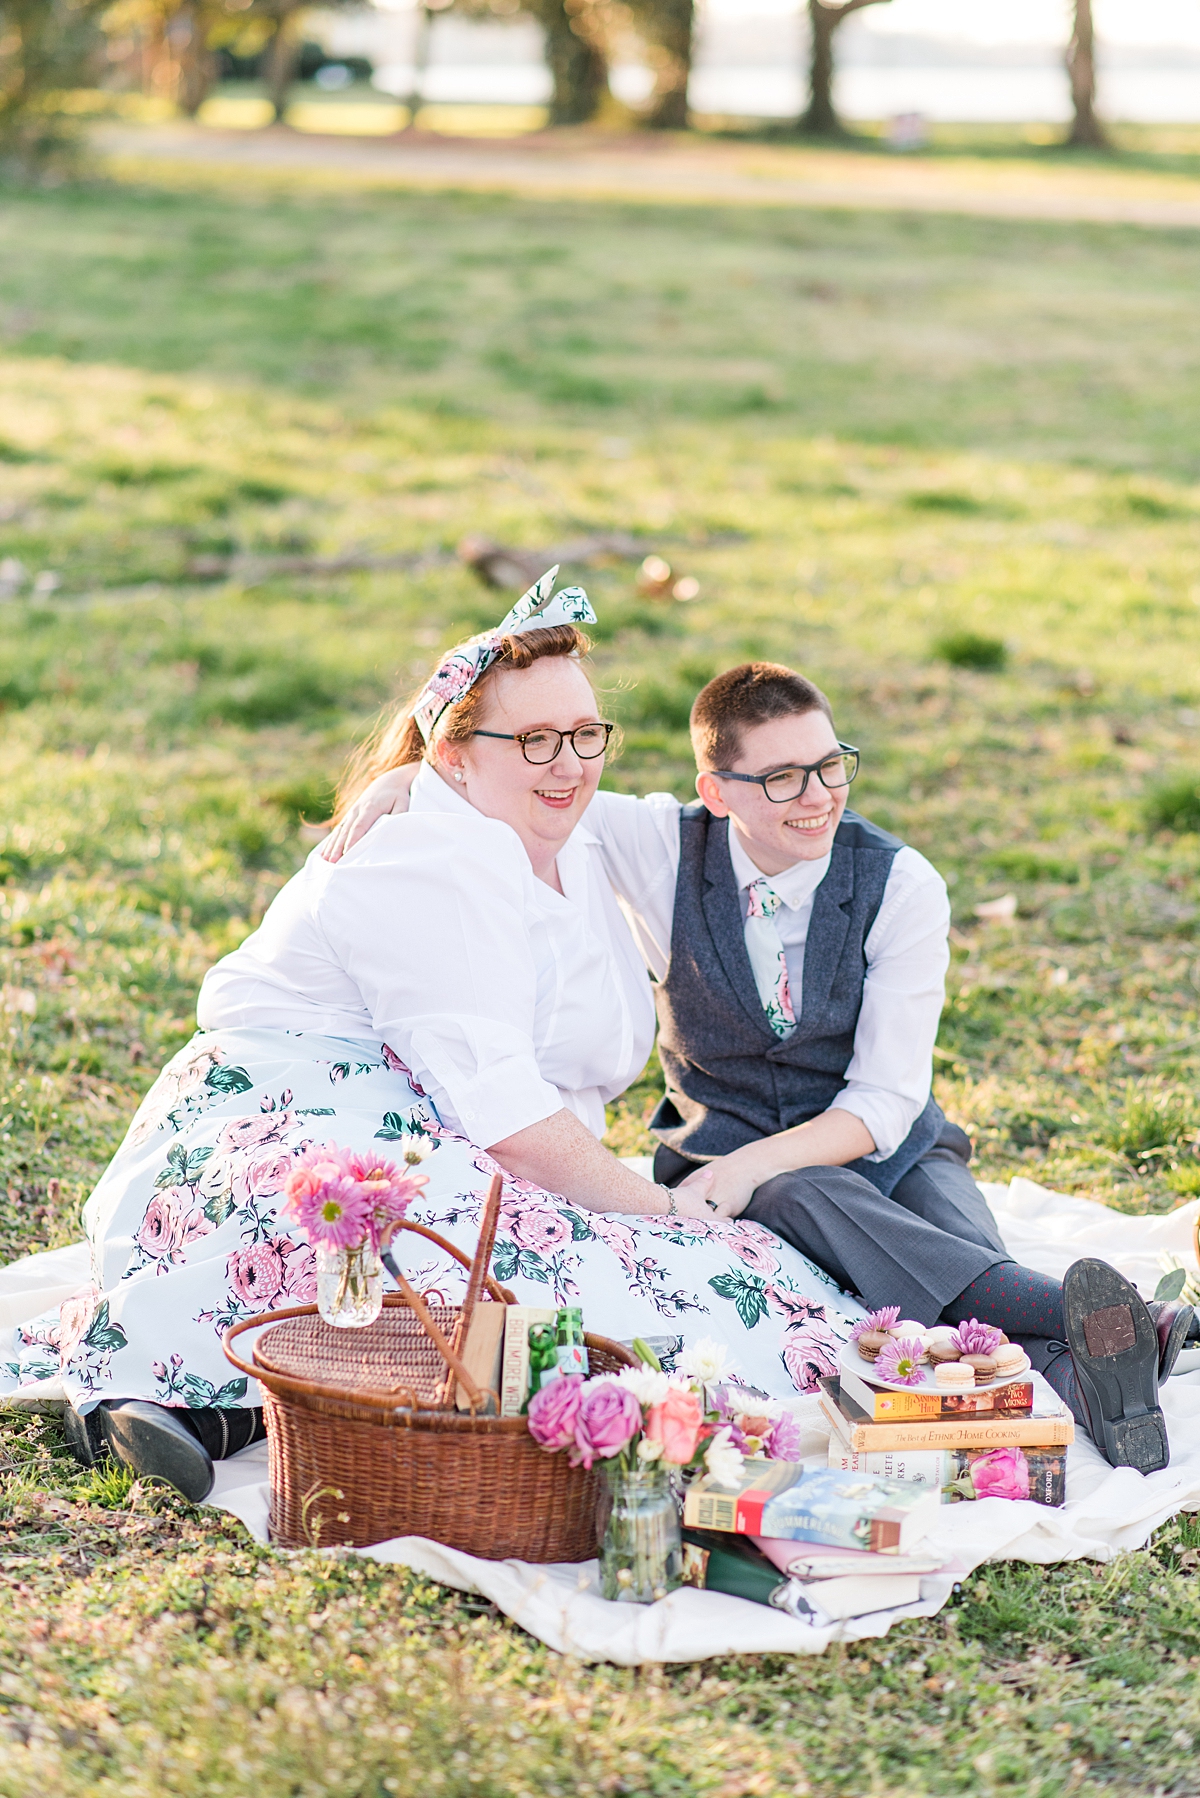 1950's Styled Engagement Session Picnic in Virginia Beach by Richmond Wedding Photographer, Kailey Brianne Photography. 